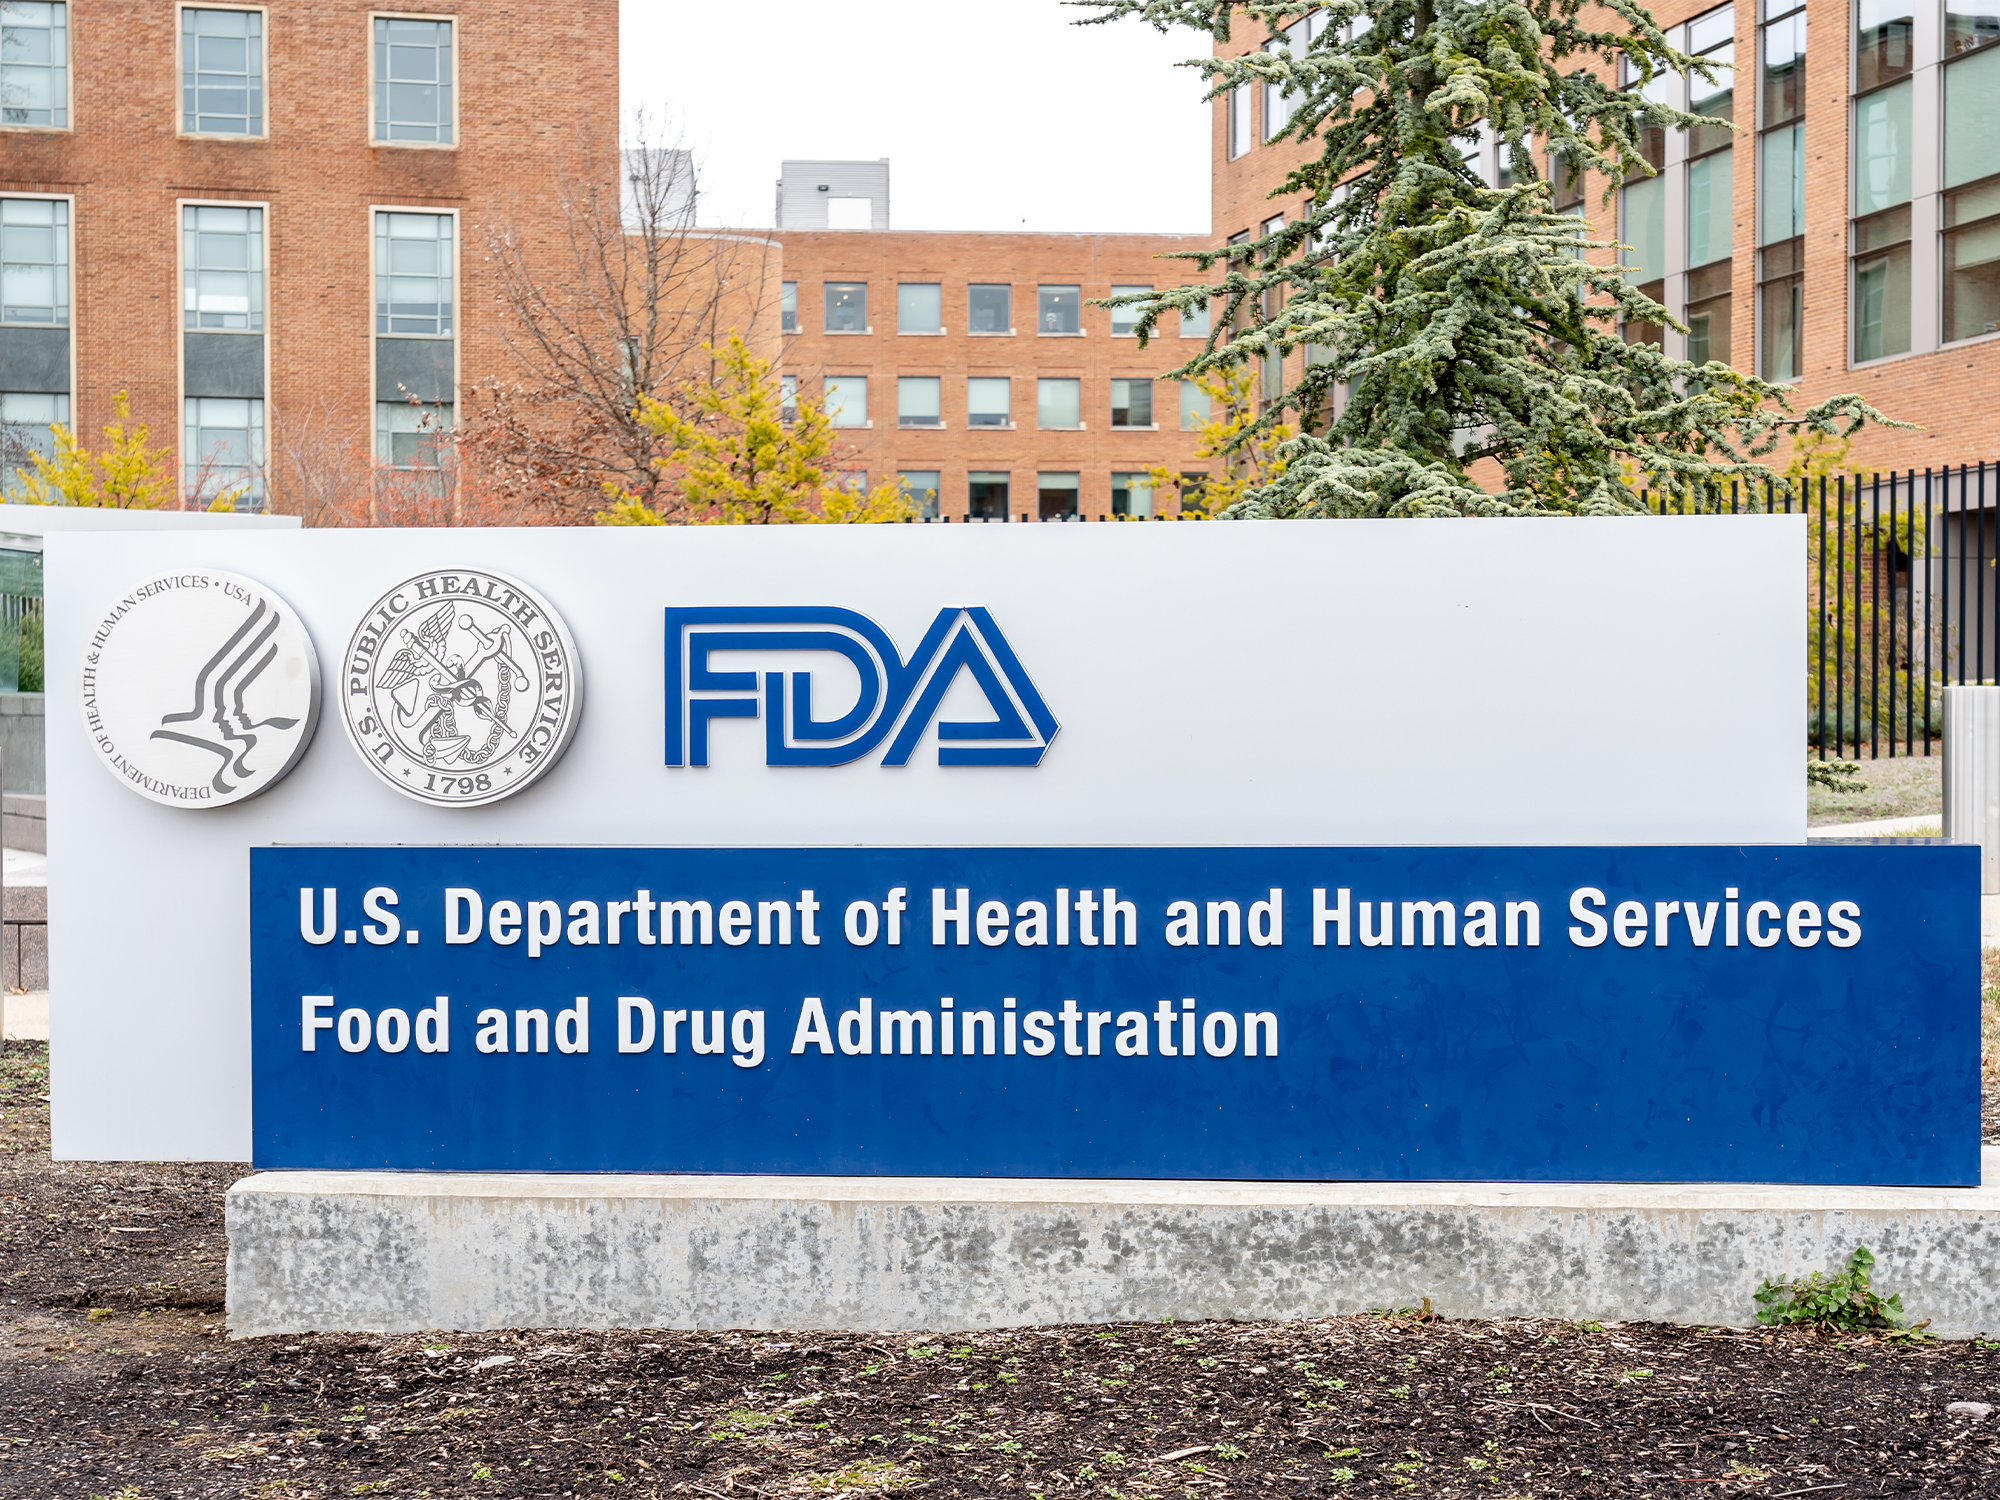 The FDA approved a fecal transplant treatment for the first time